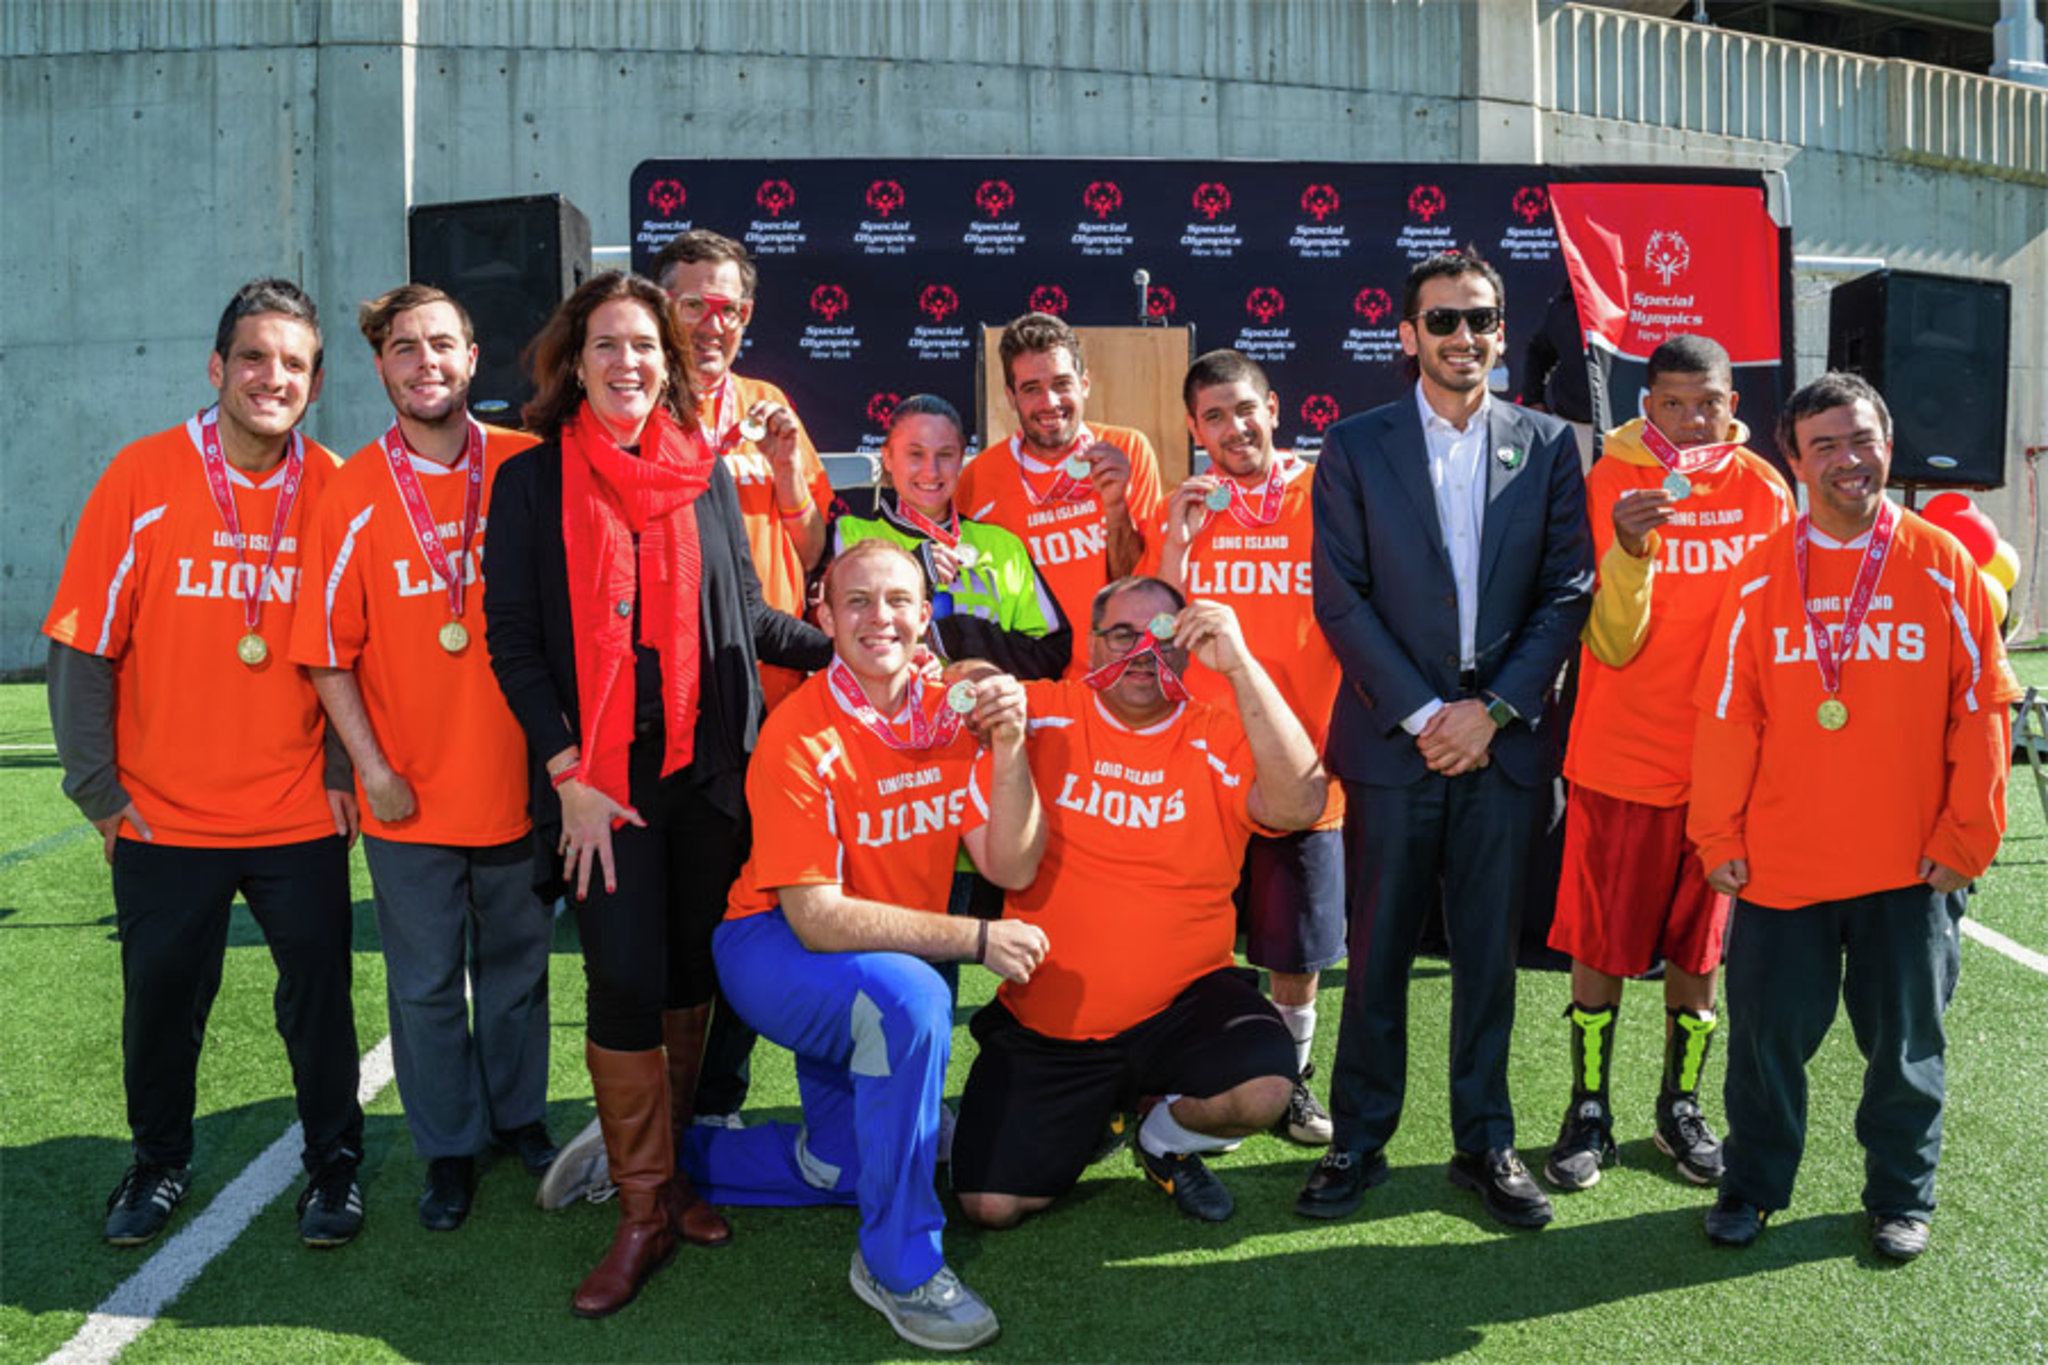 SPECIAL OLYMPICS NEW YORK KICKS OFF 50th ANNIVERSARY WITH FIRSTEVER